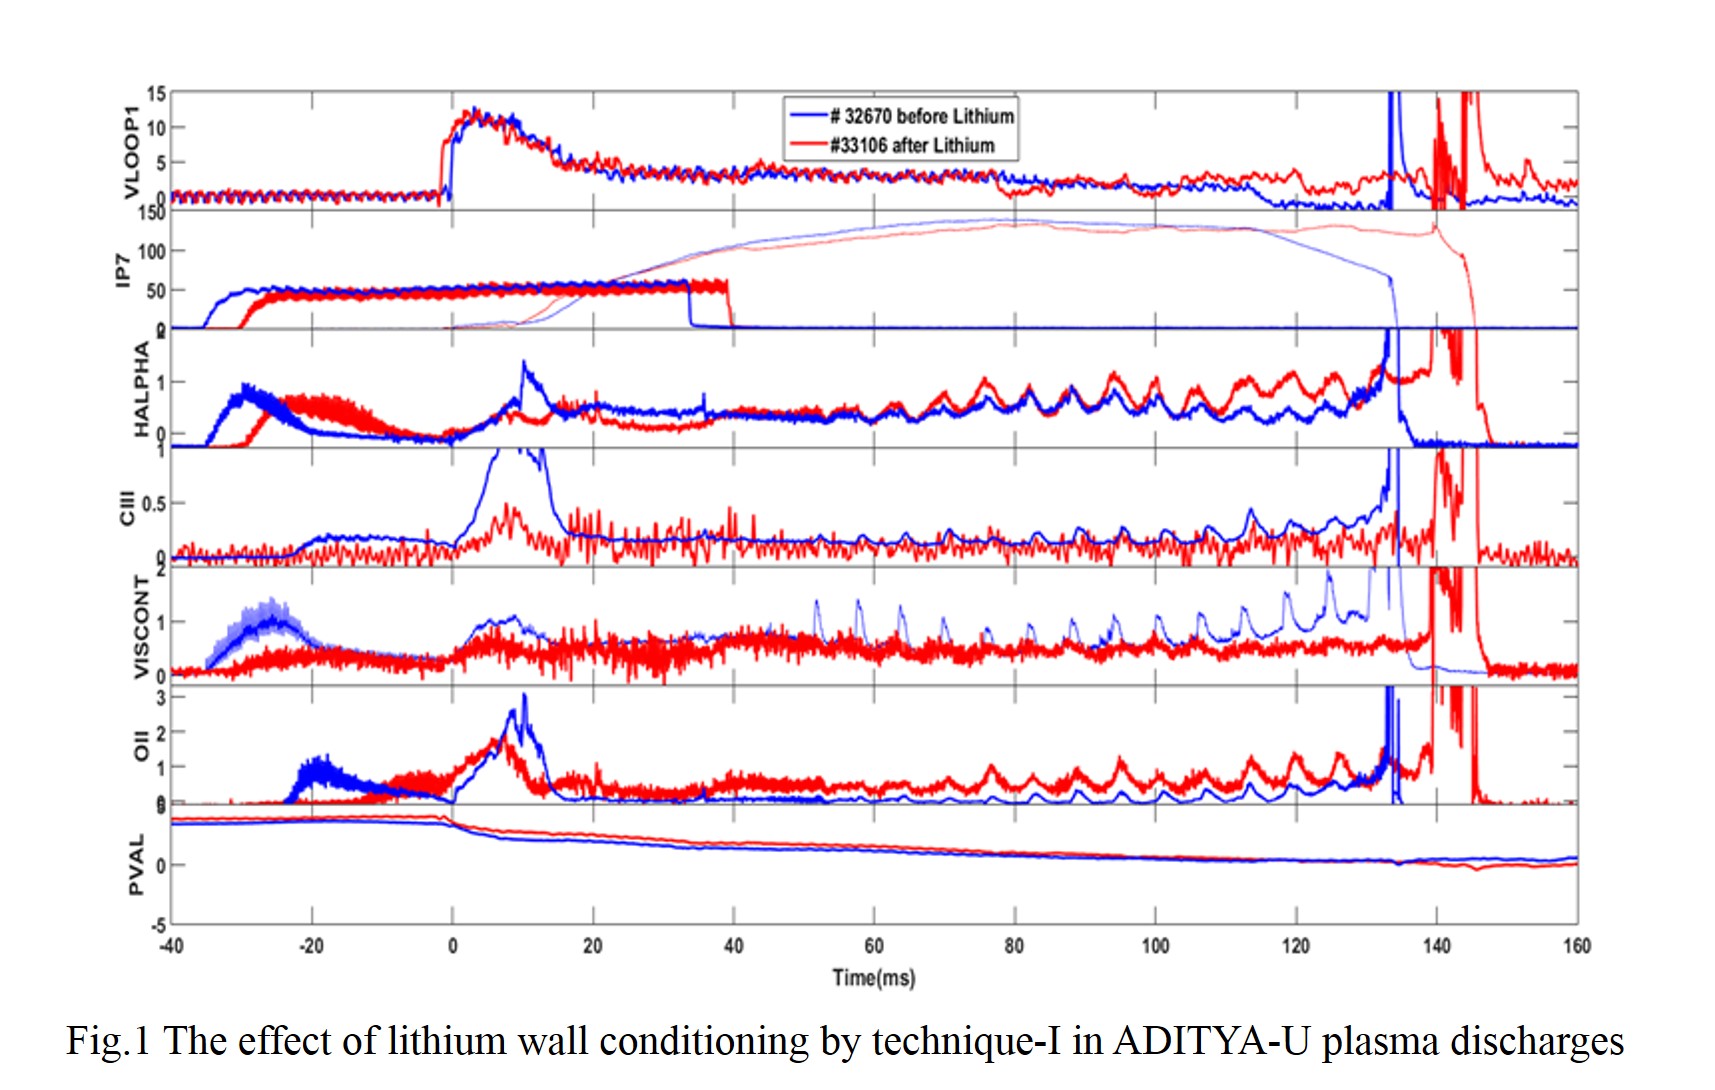 The effect of lithium wall conditioning by technique-I in ADITYA-U plasma discharges.